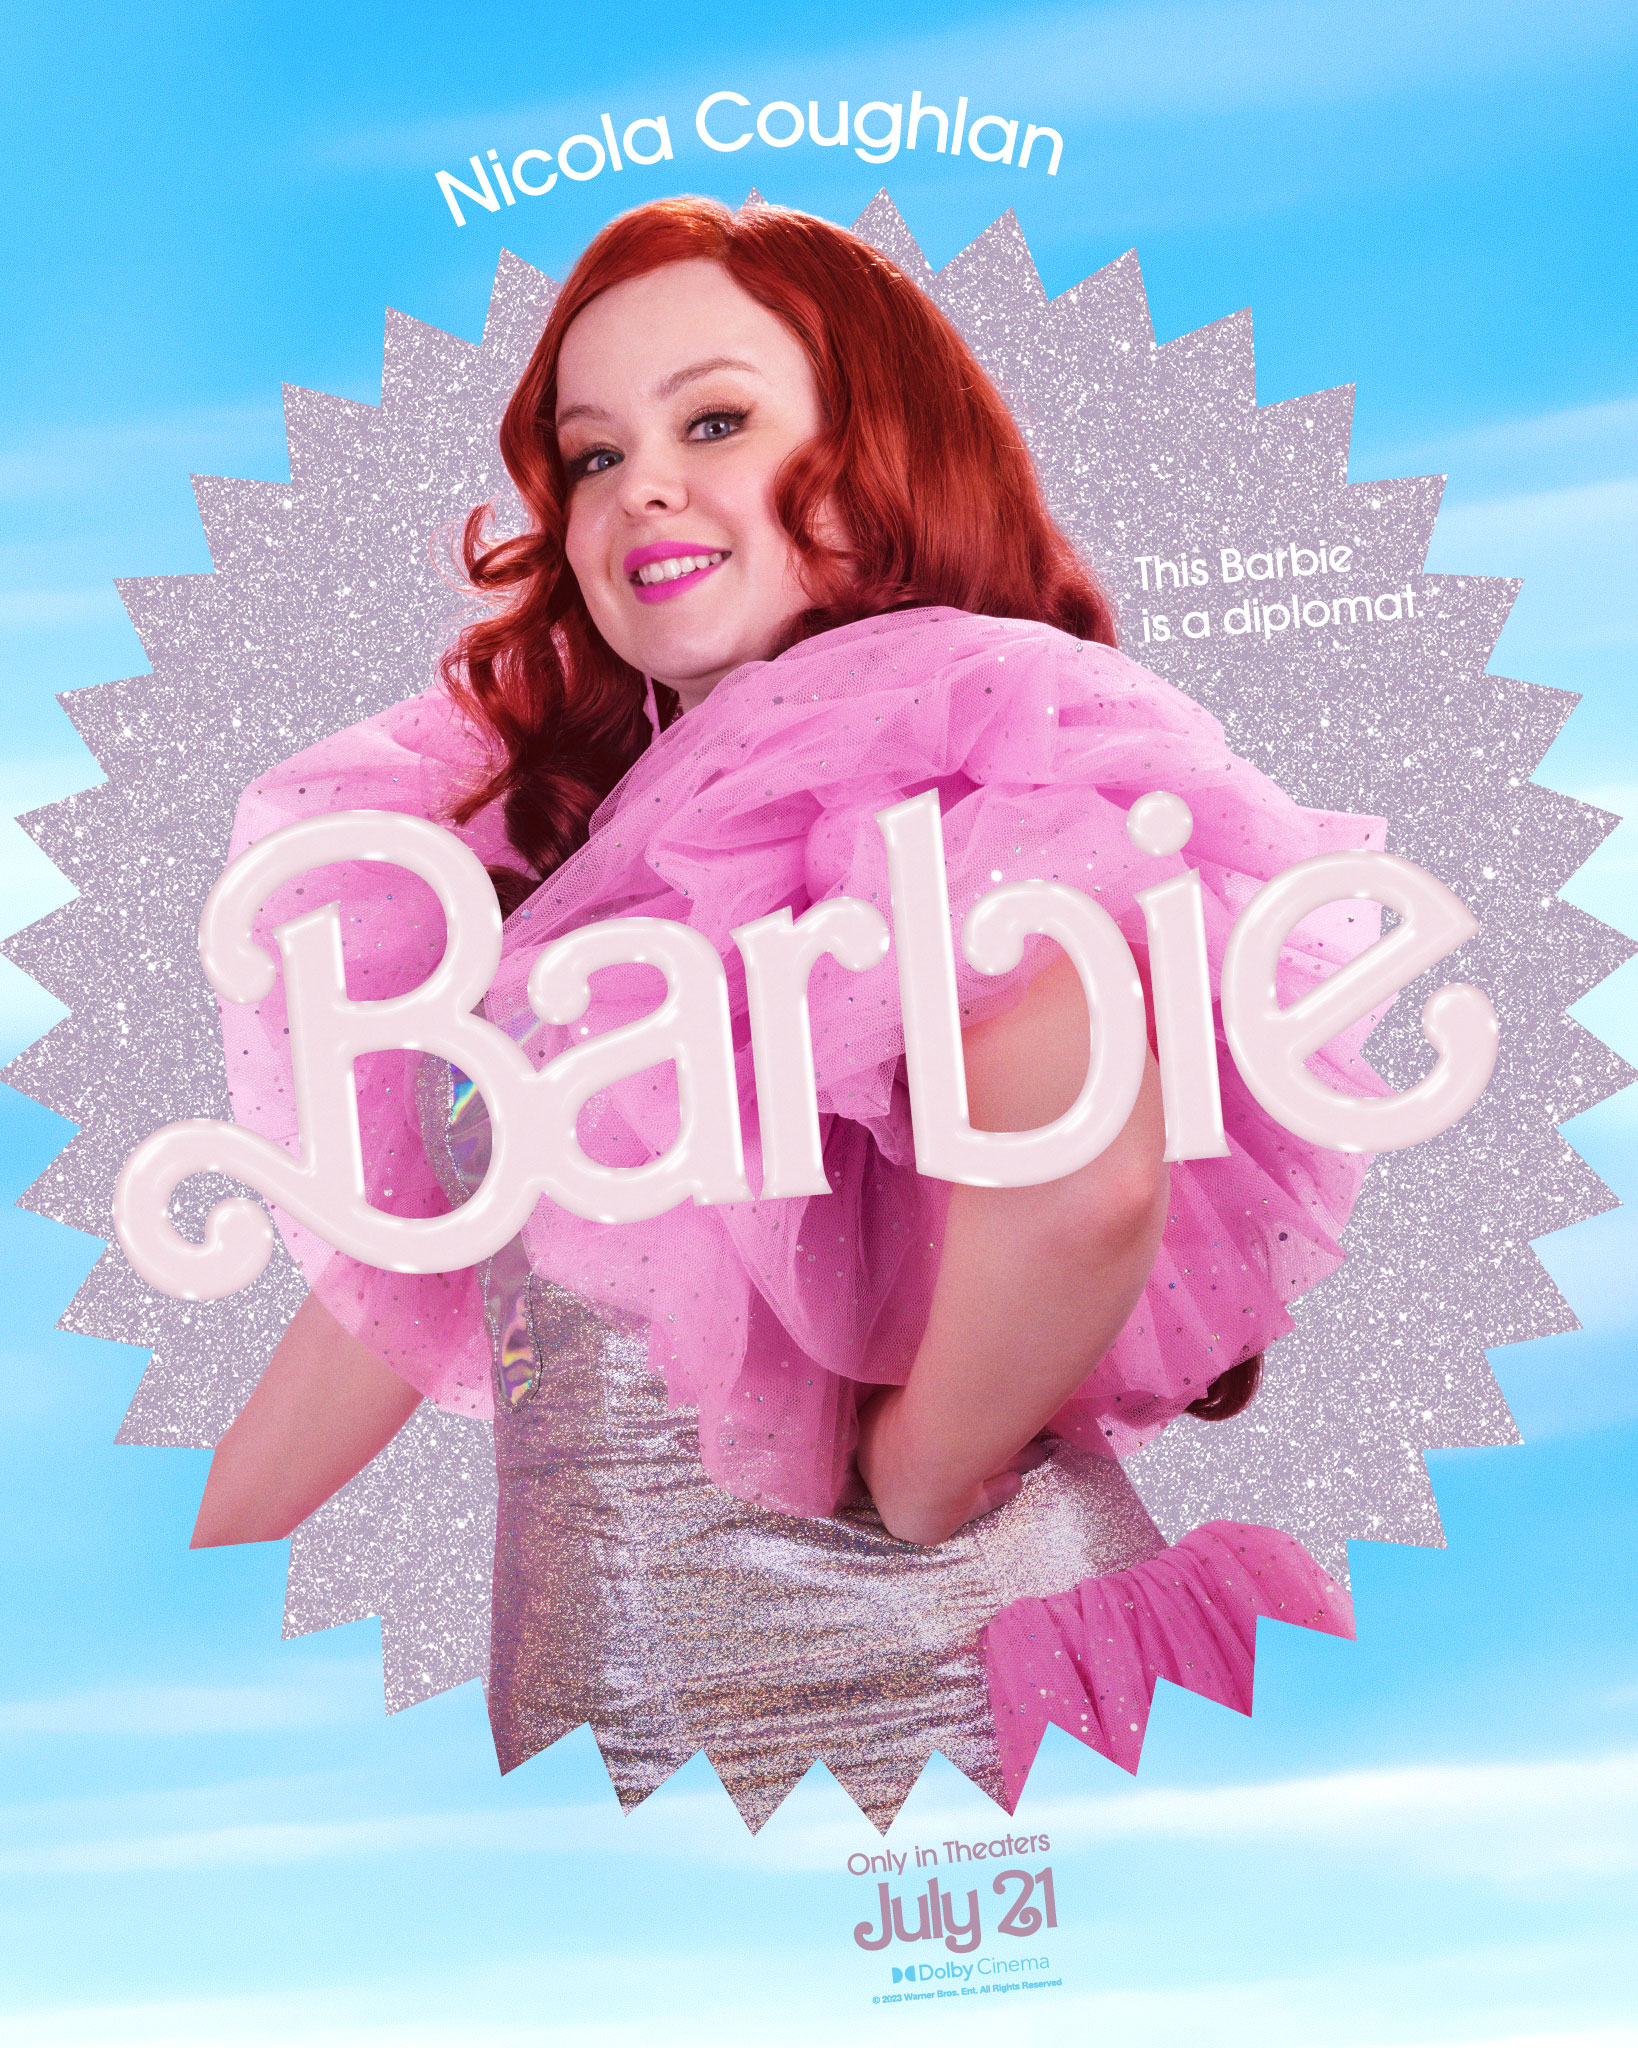 Barbie the movie 2023 trailer, posters, pictures, cast and more info